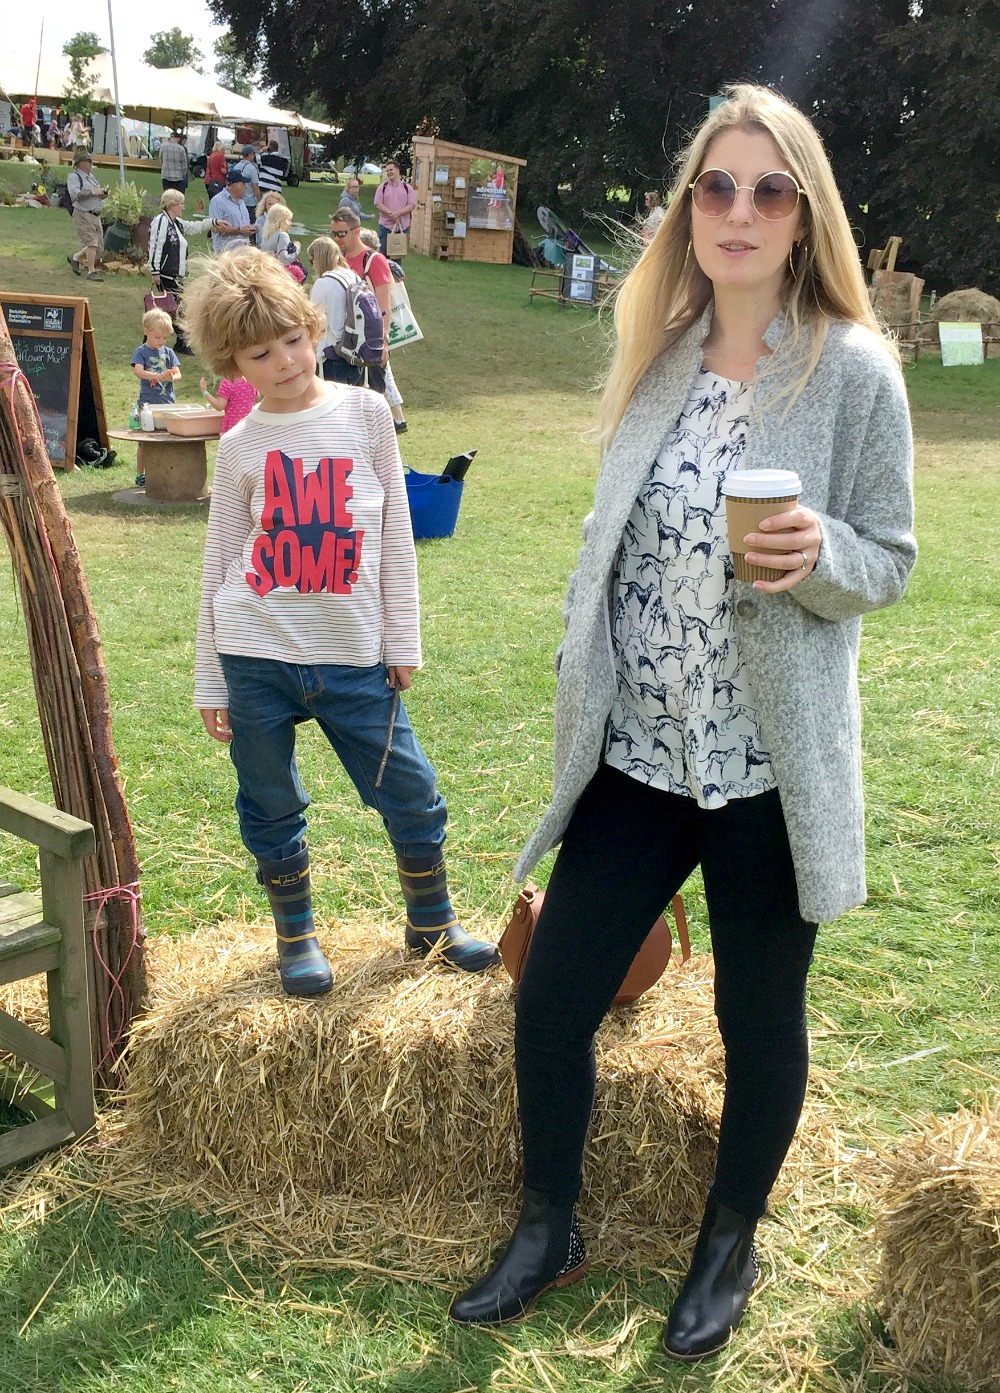 countryfile live, countryfile magazine, short breaks uk, weekend breaks, kids festival, kids activities, kids event, kids fun, blenheim palace, joules, what i wore, festival outfits